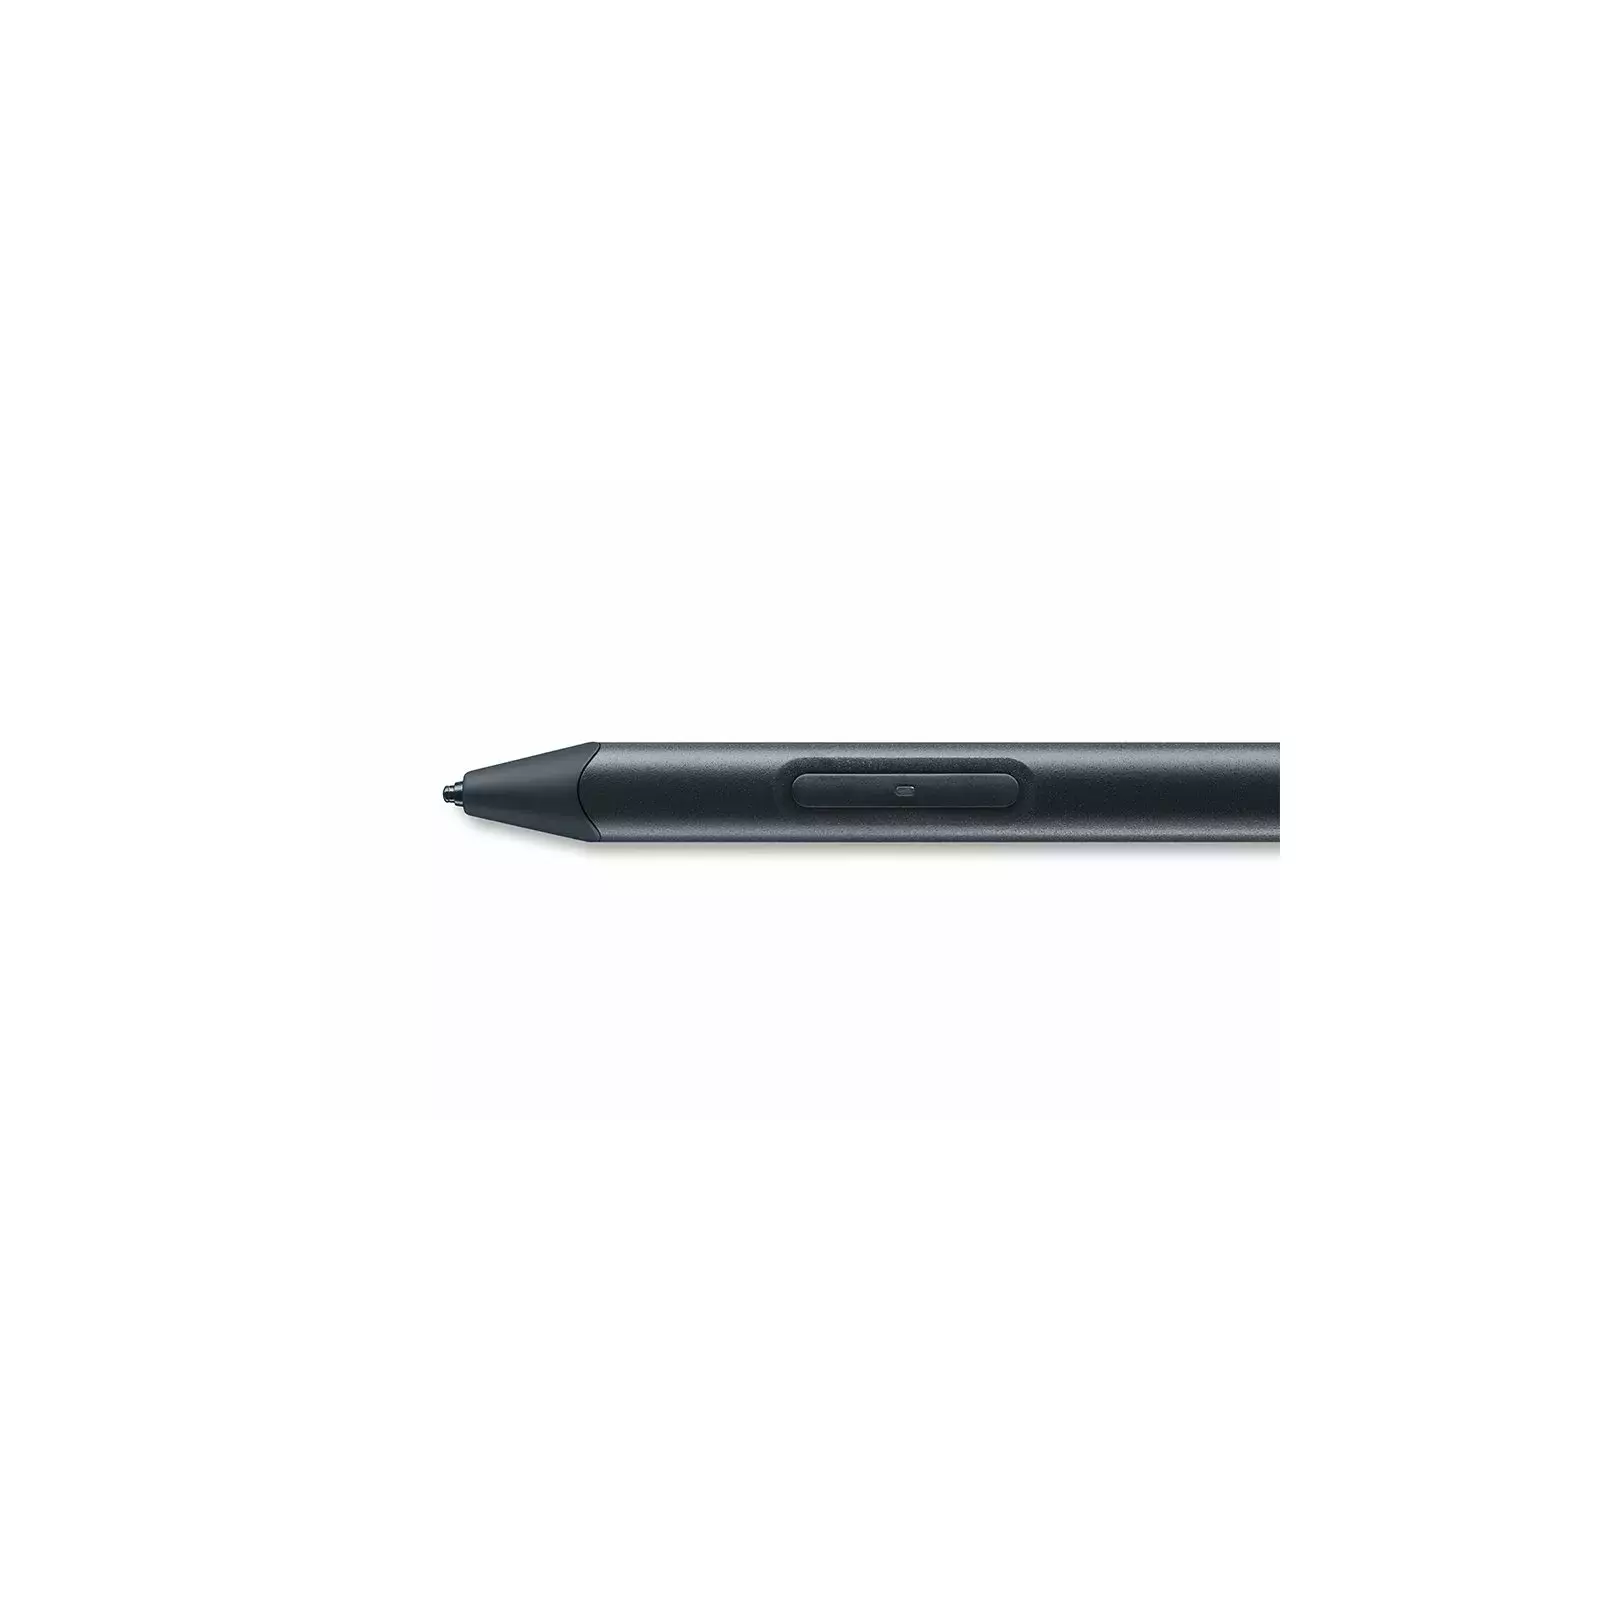 Rare Wacom Bamboo Sketch Stylus Pen Collectable  wwwtheconservativeonline